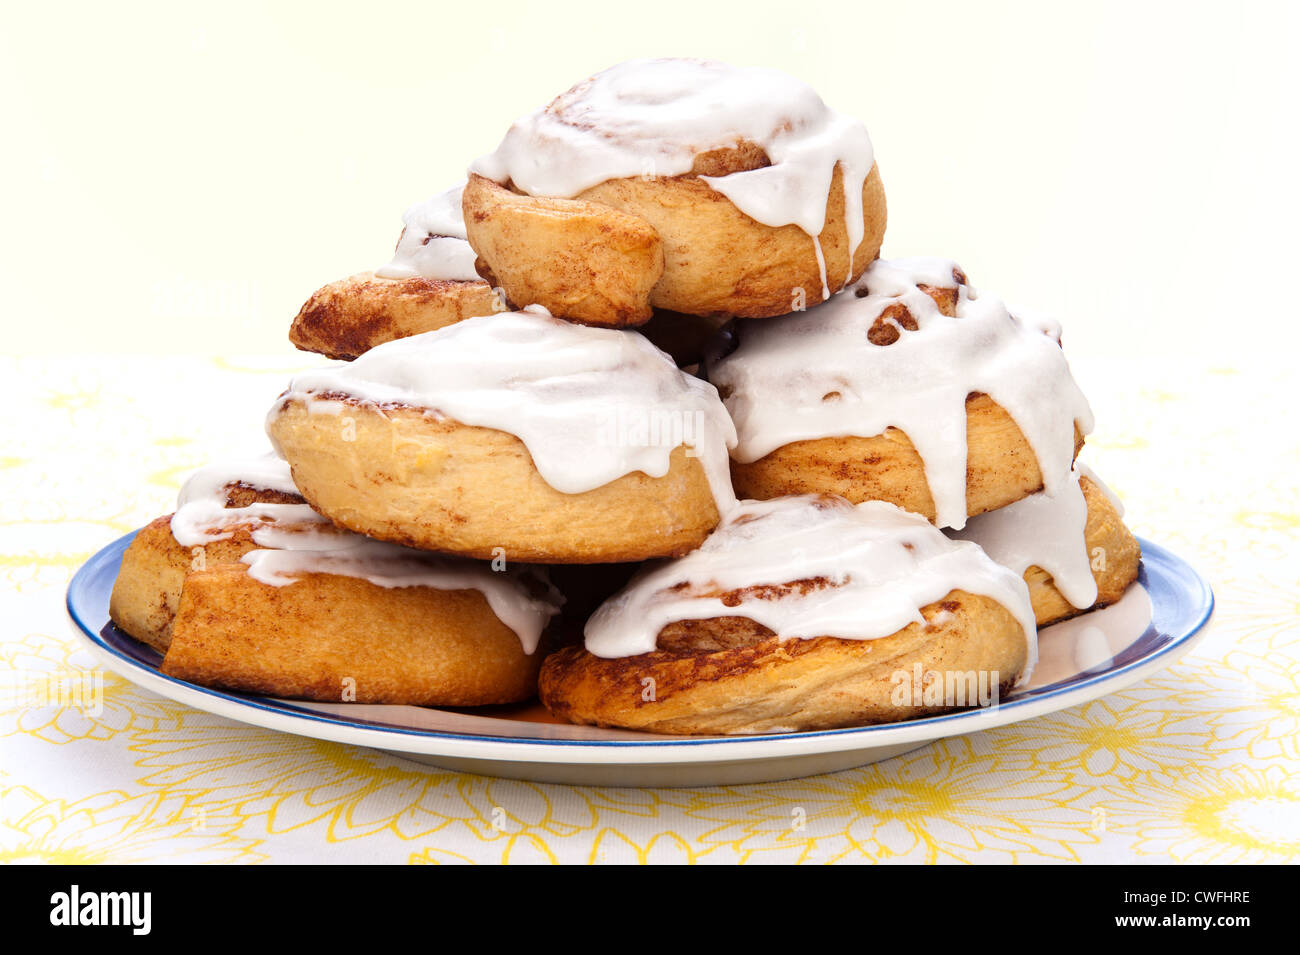 A plate of freshly baked cinnamon rolls with sweet, white icing dripping down the sides. Stock Photo